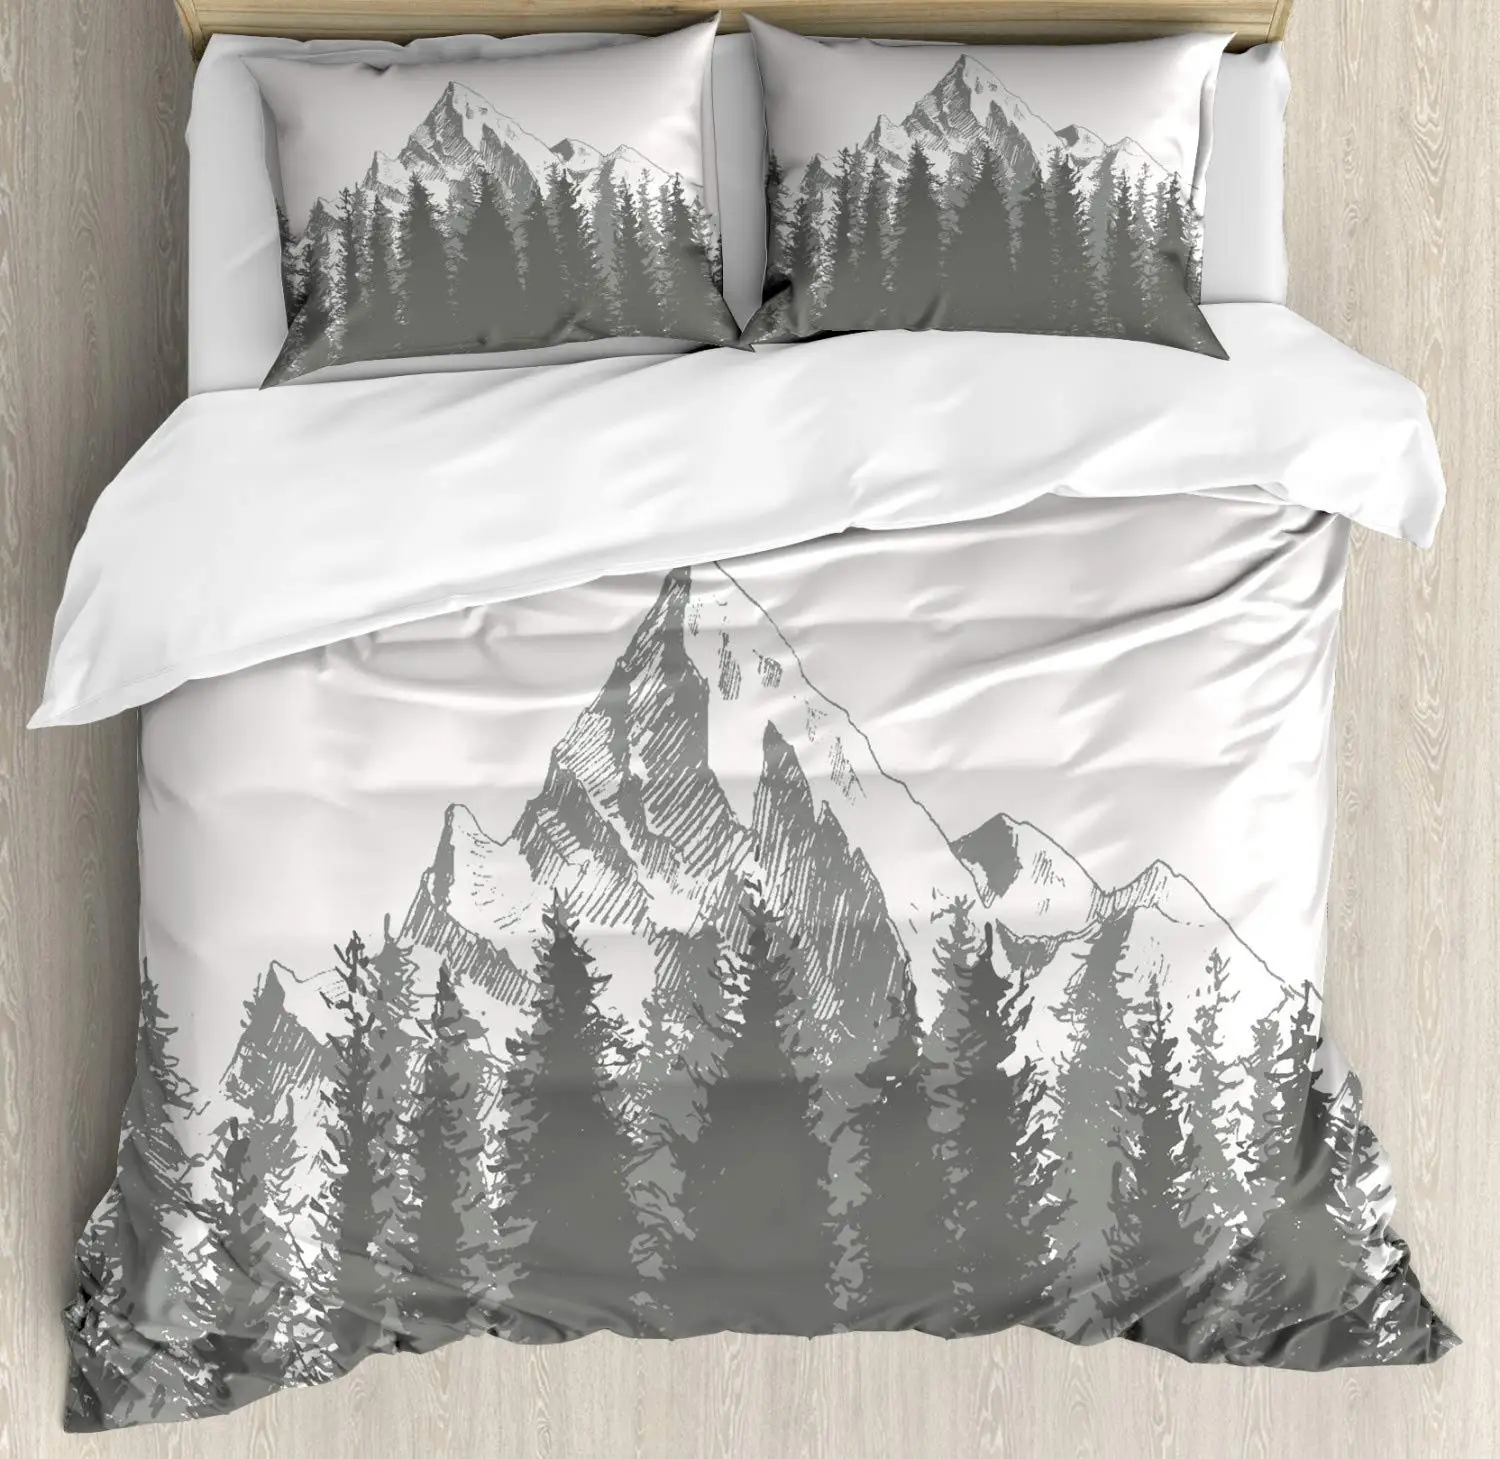 

Mountain Bedding Pine Forest Duvet Cover 2/3pcs Polyester Comforter Cover Queen/King Size,Nature Scene Grey Trees Art Folk Style